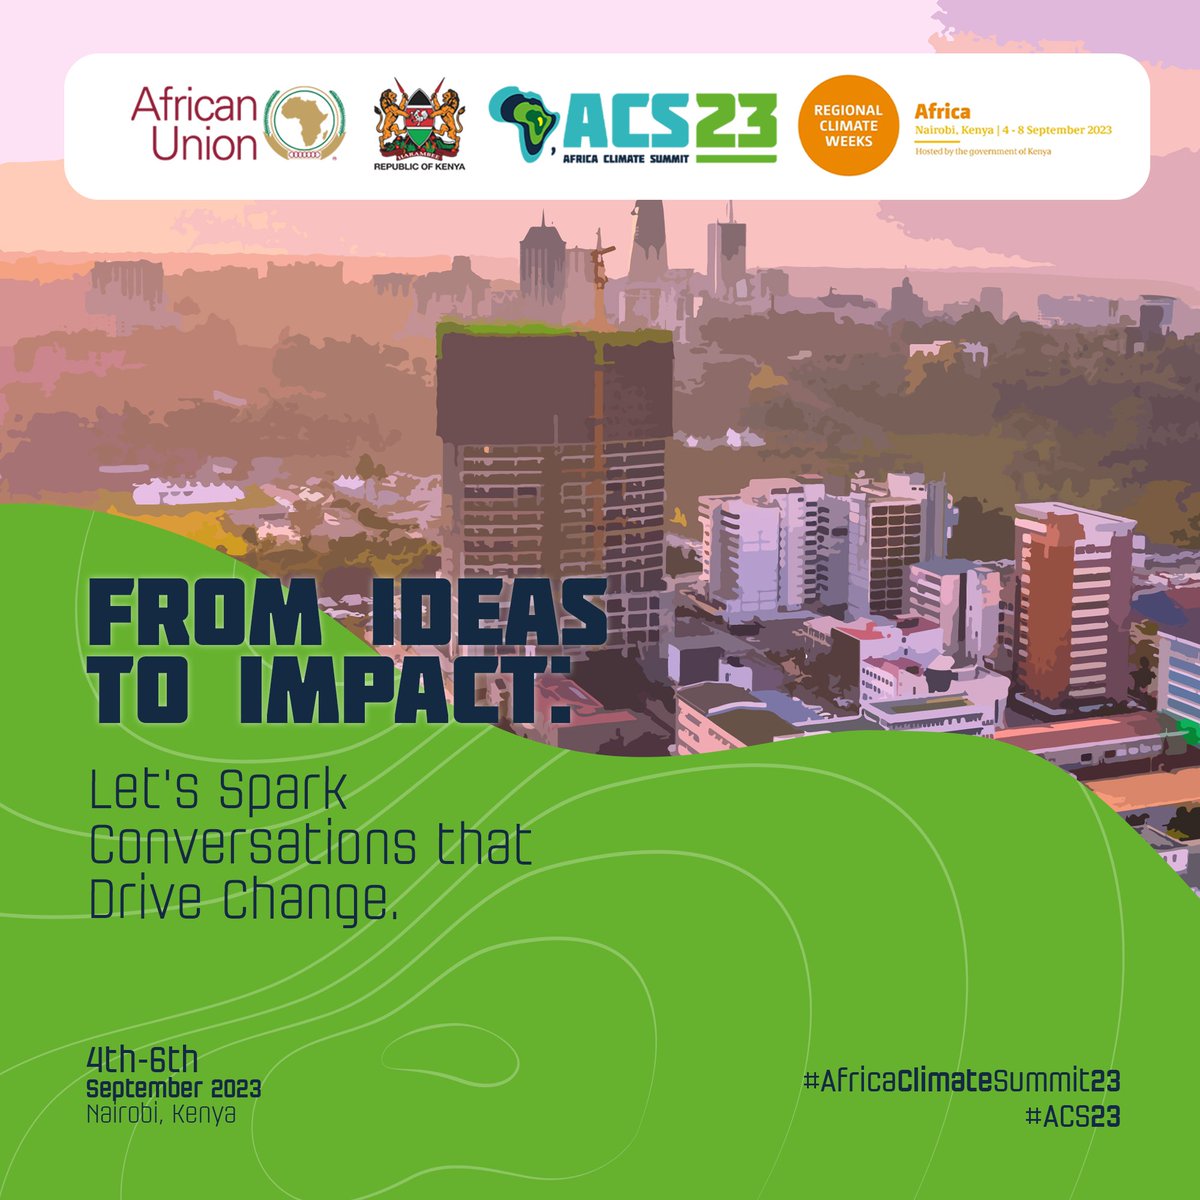 Let's turn our ideas to impact as we make bold commitments. We have the opportunity to turn the tide on climate change, not only in Africa but also globally. Join us at the heart of Nairobi for #ACS23 and Africa Climate week convened by @_AfricanUnion and hosted by the